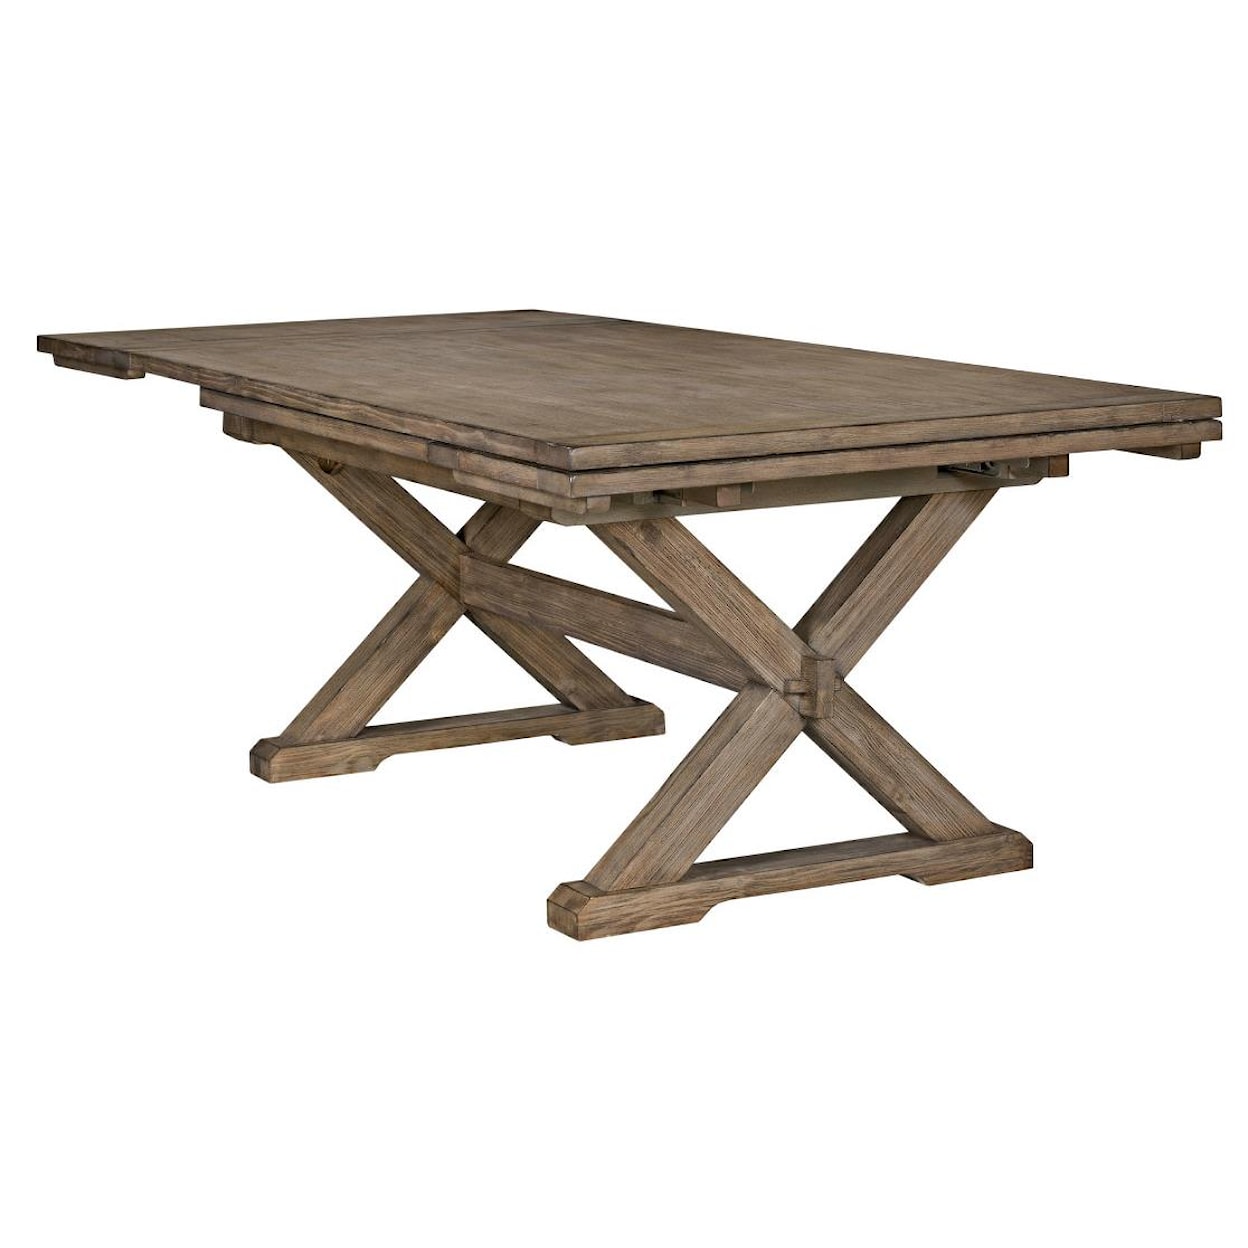 Kincaid Furniture Foundry Saw Buck Dining Table